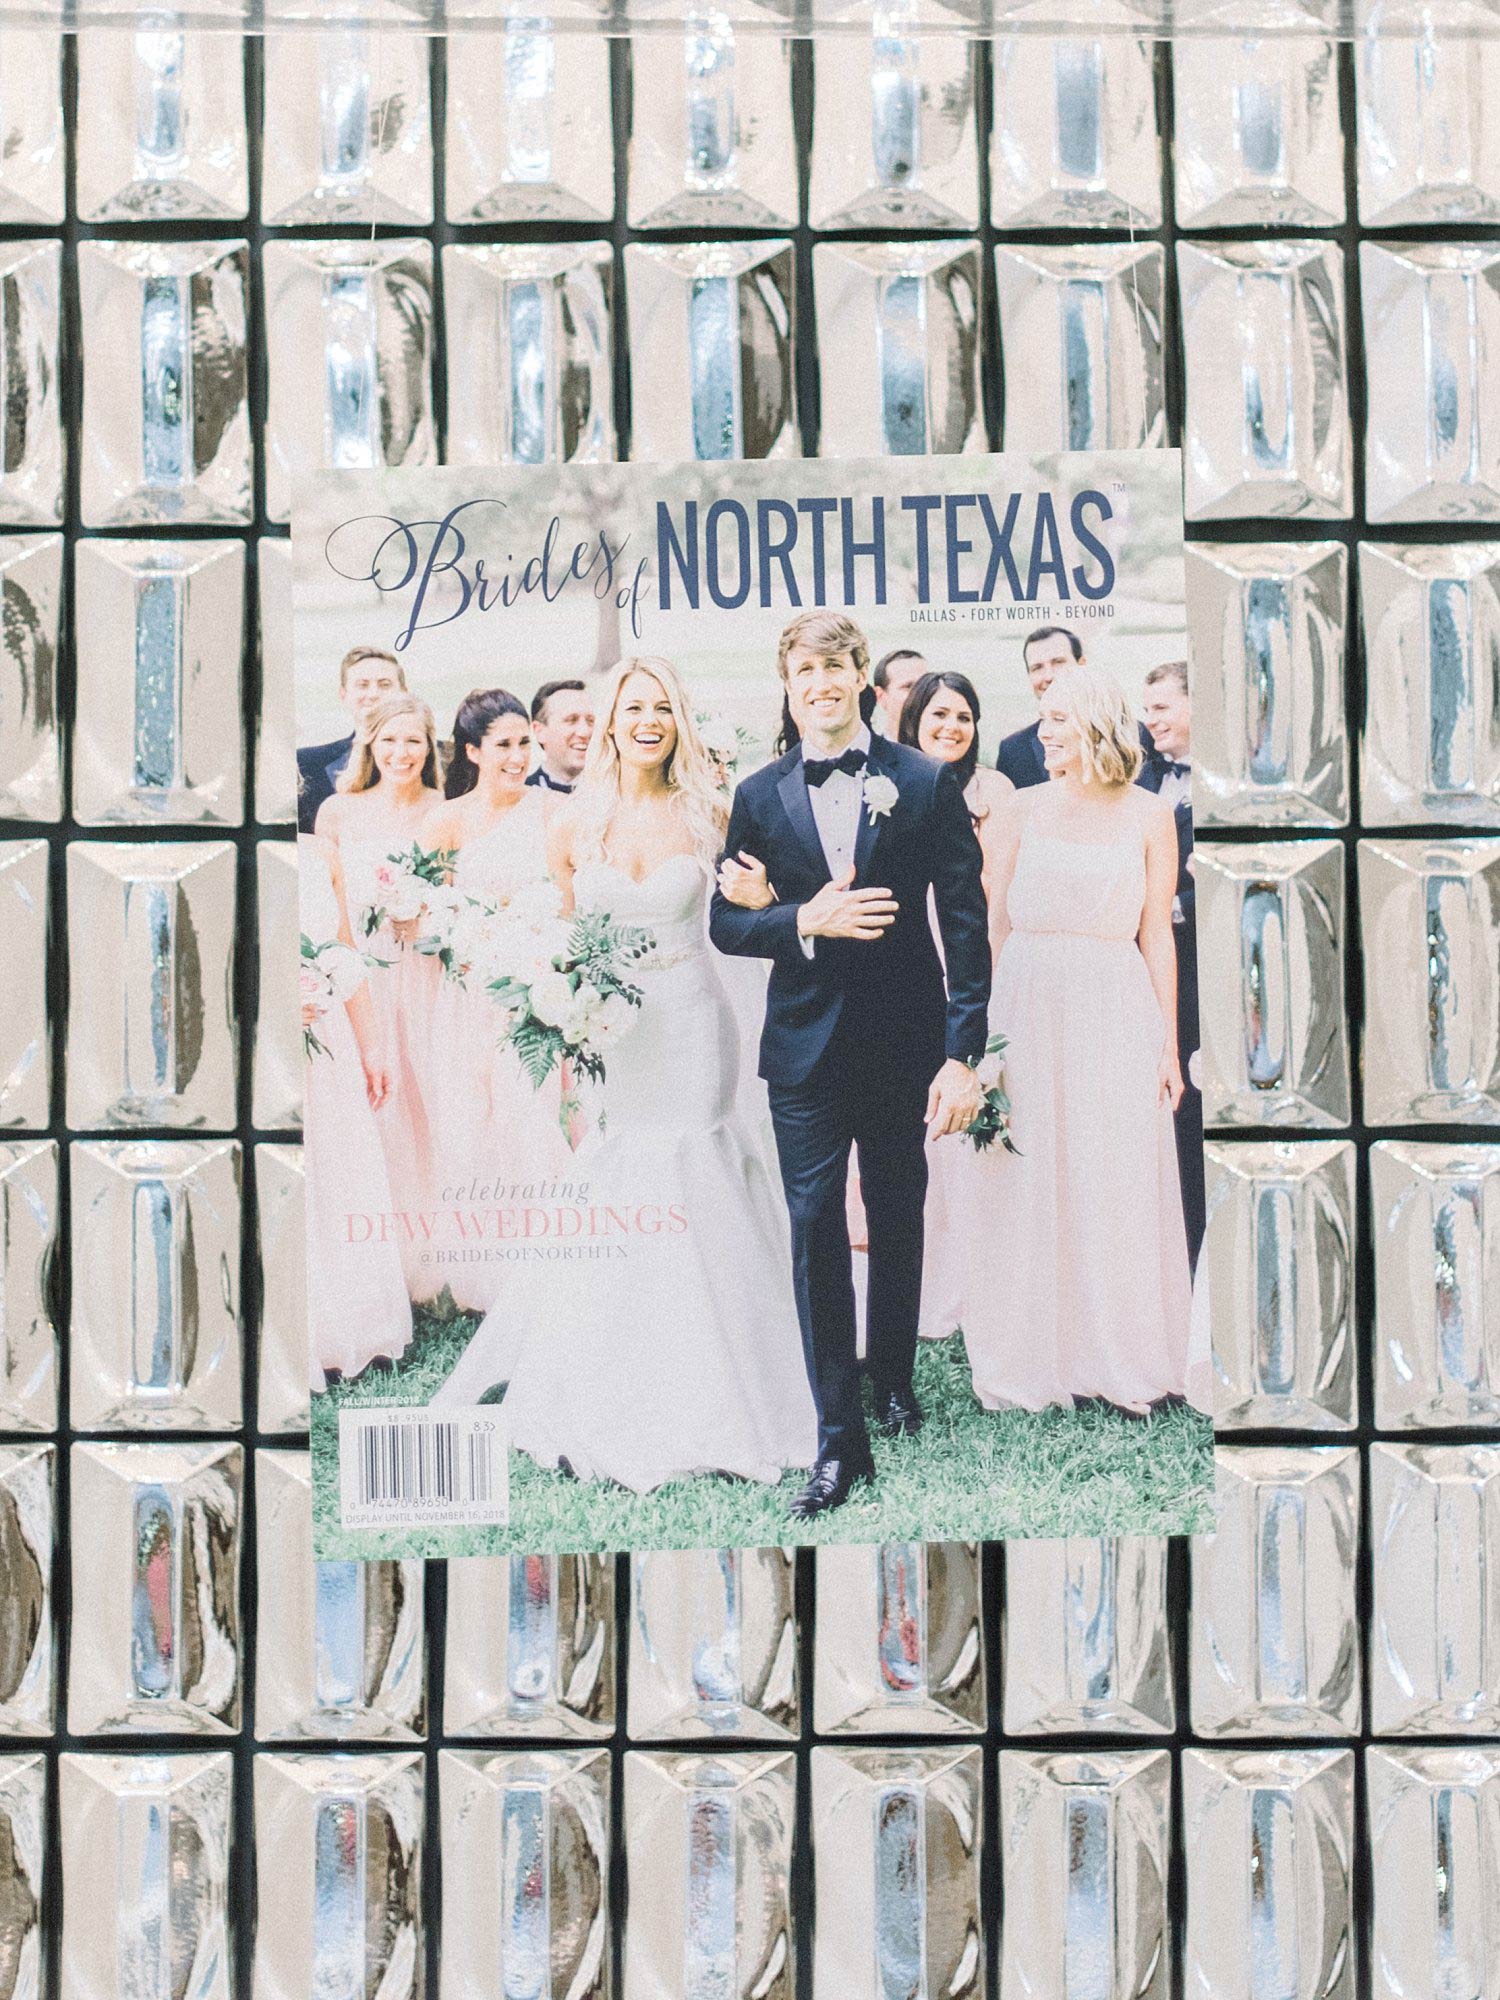 Brides of North Texas Spring 2018 issue